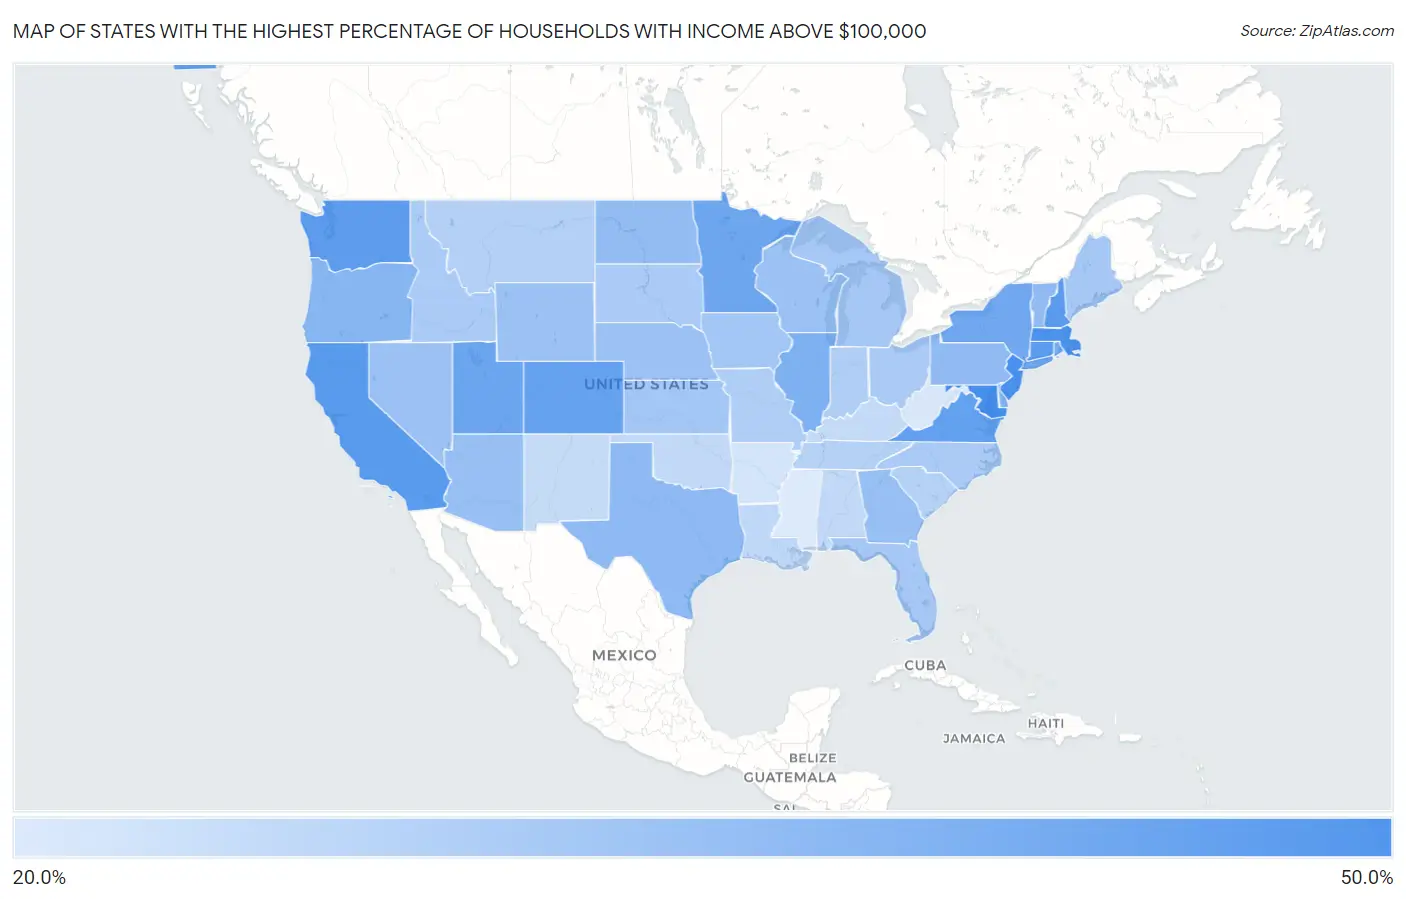 States with the Highest Percentage of Households with Income Above $100,000 in the United States Map